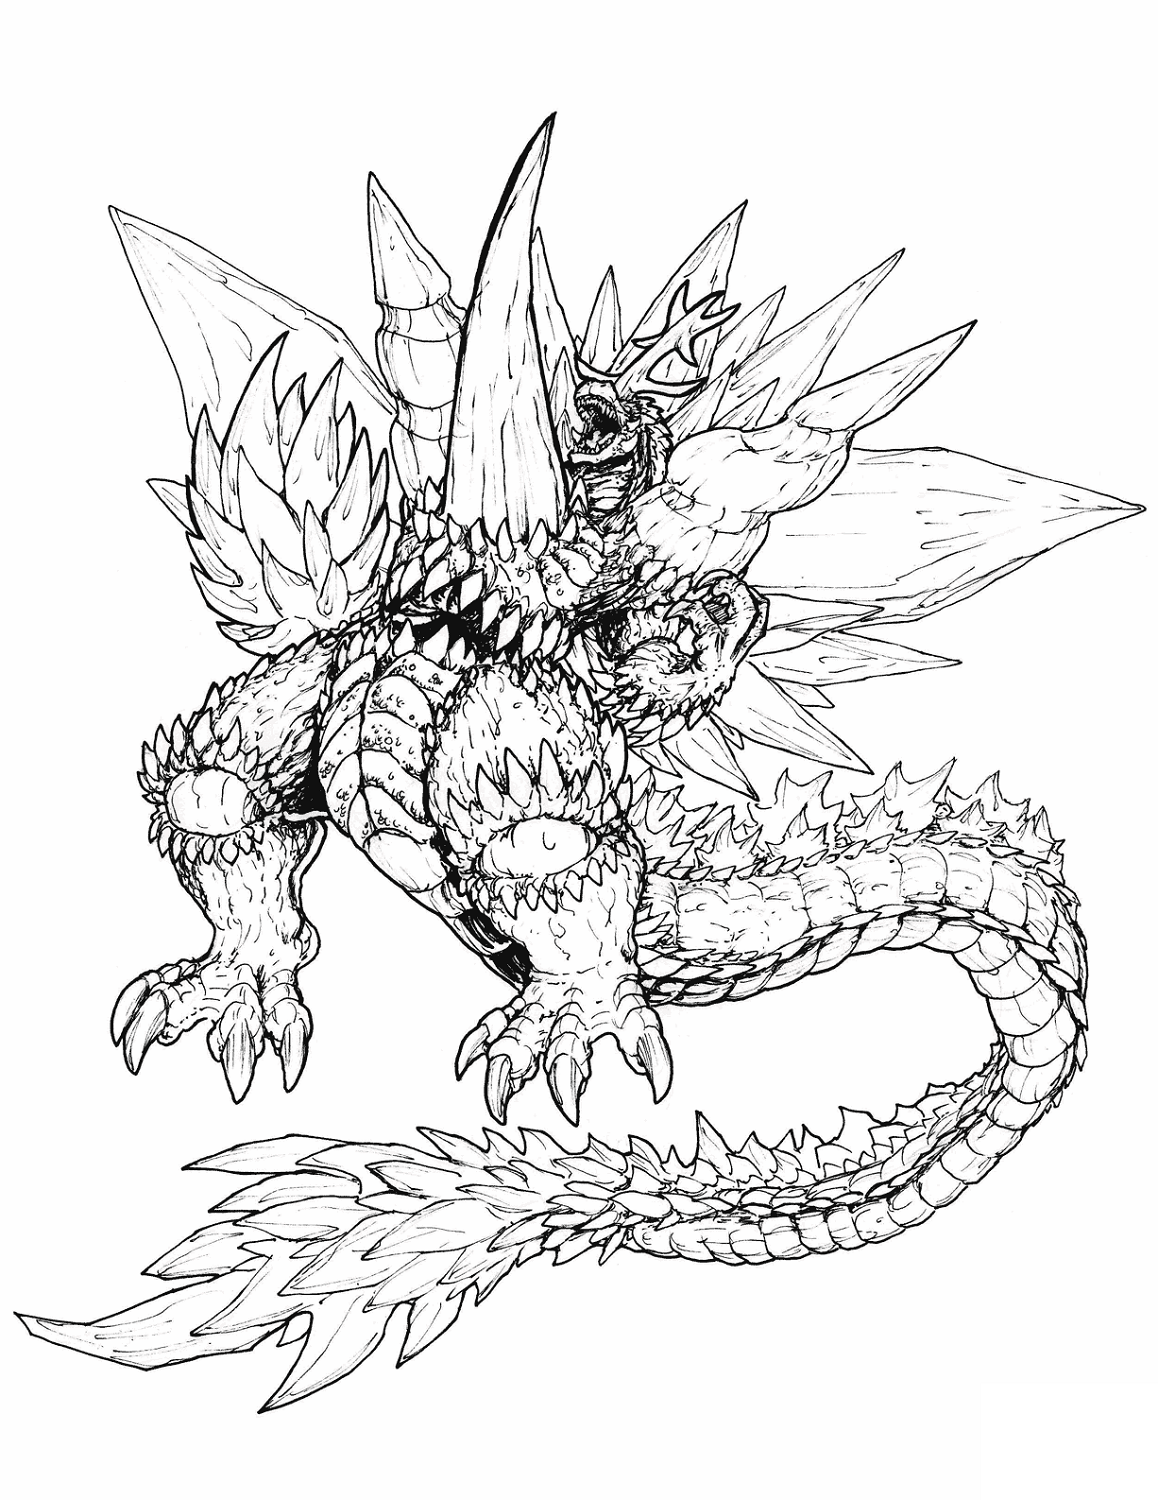 Godzilla Drawings Printable Get This Free Printable Godzilla Coloring Pages For Kids